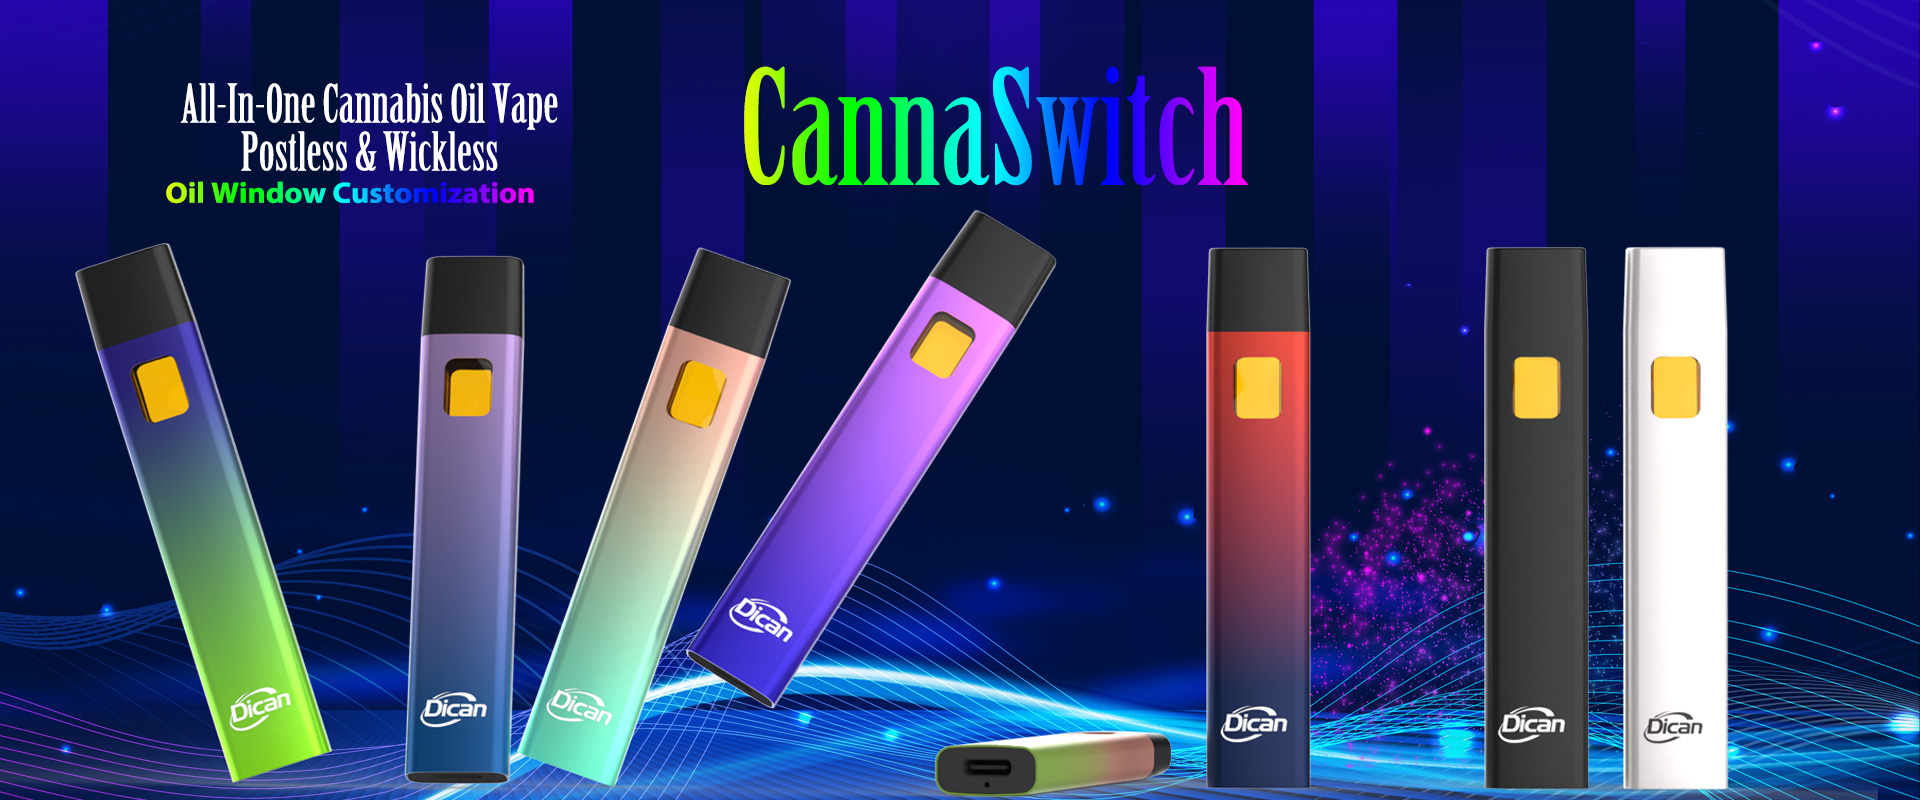 CannaSwitch All-In-One Postless Cannabis Vape